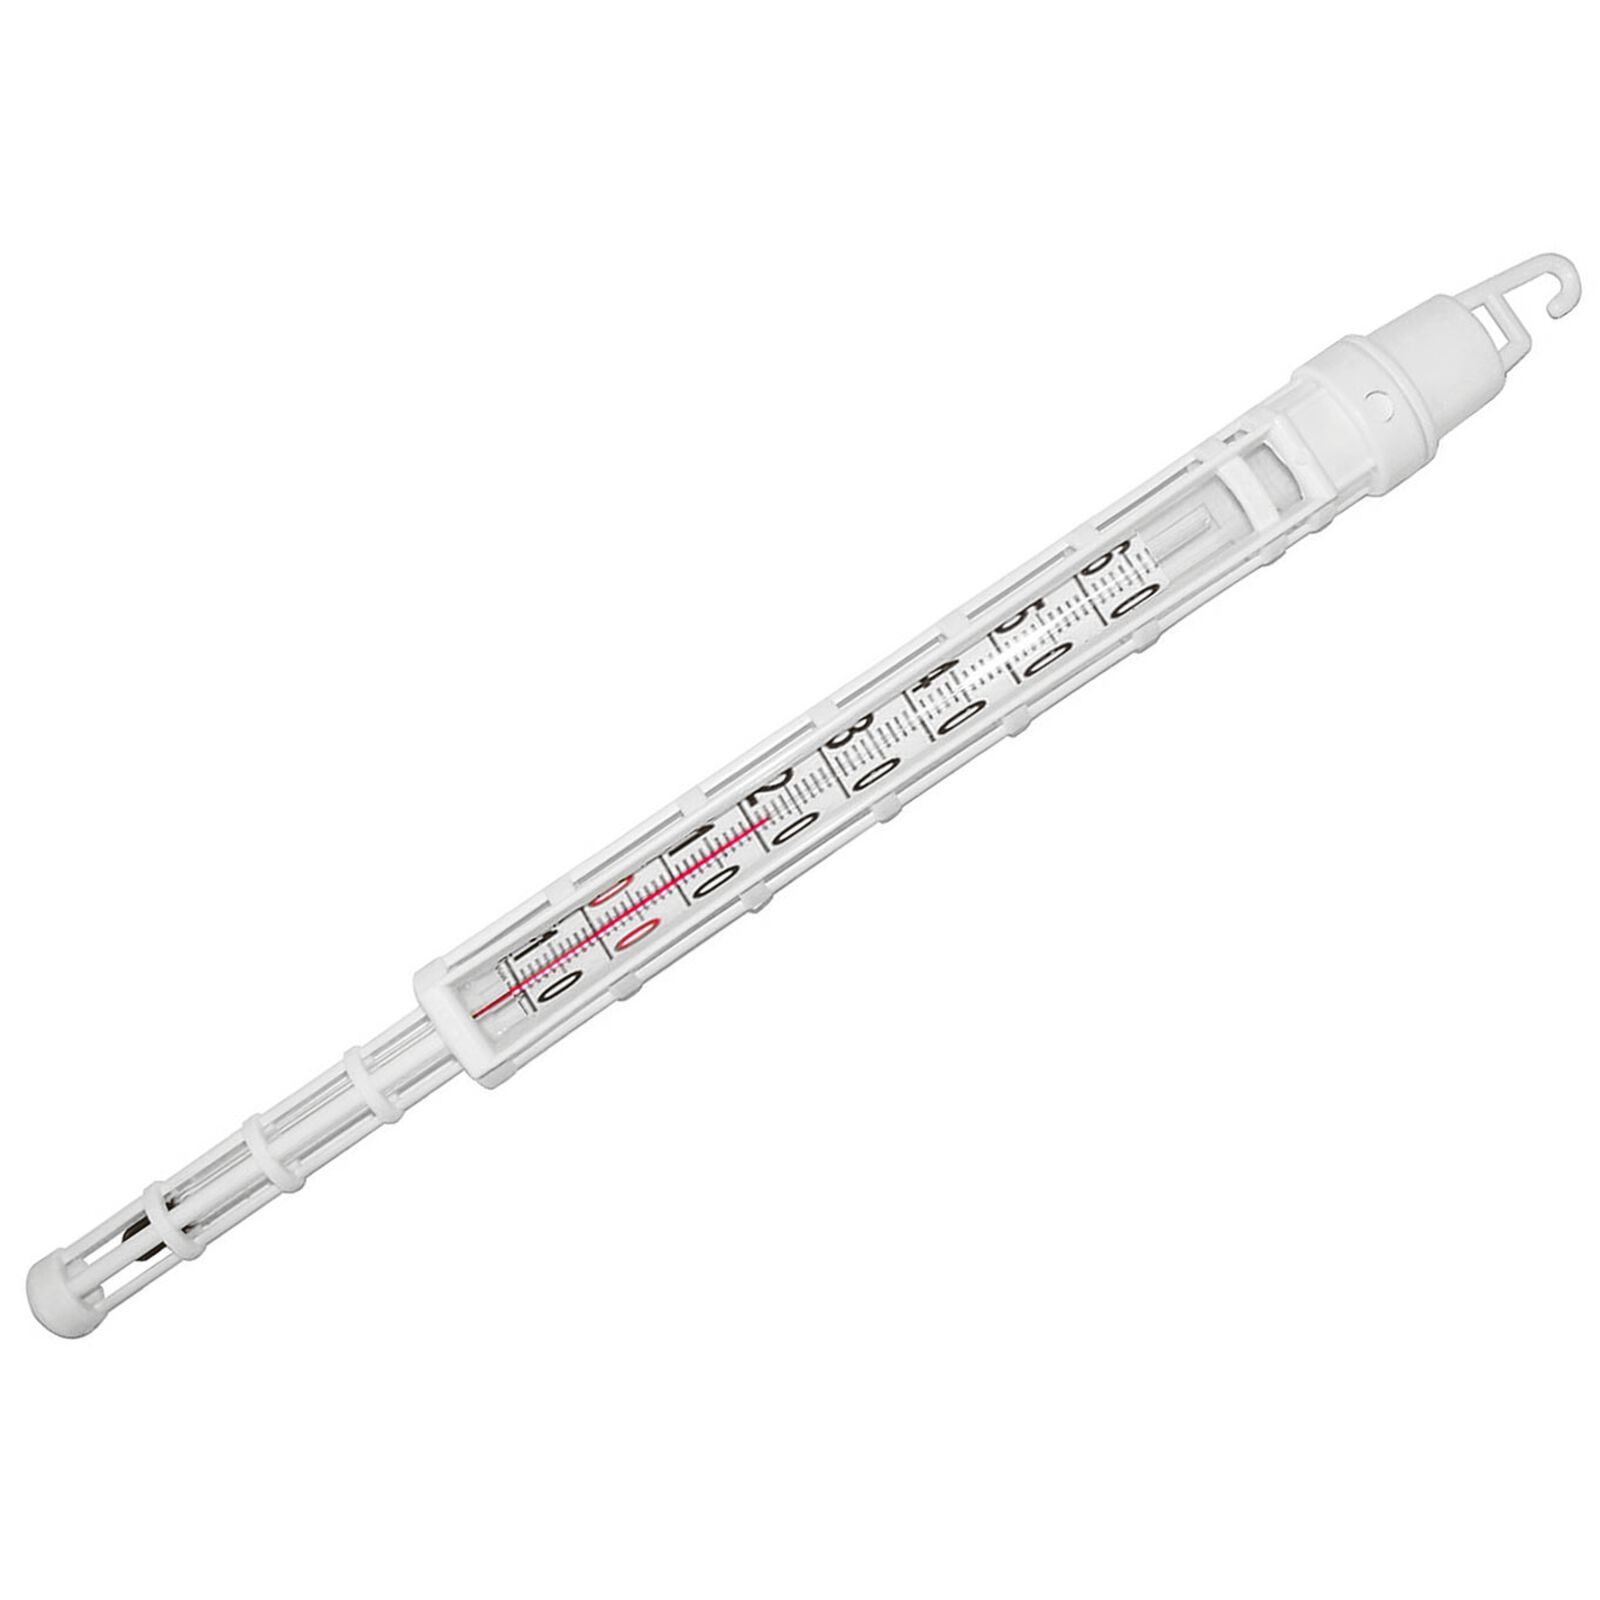 Baker’s thermometer